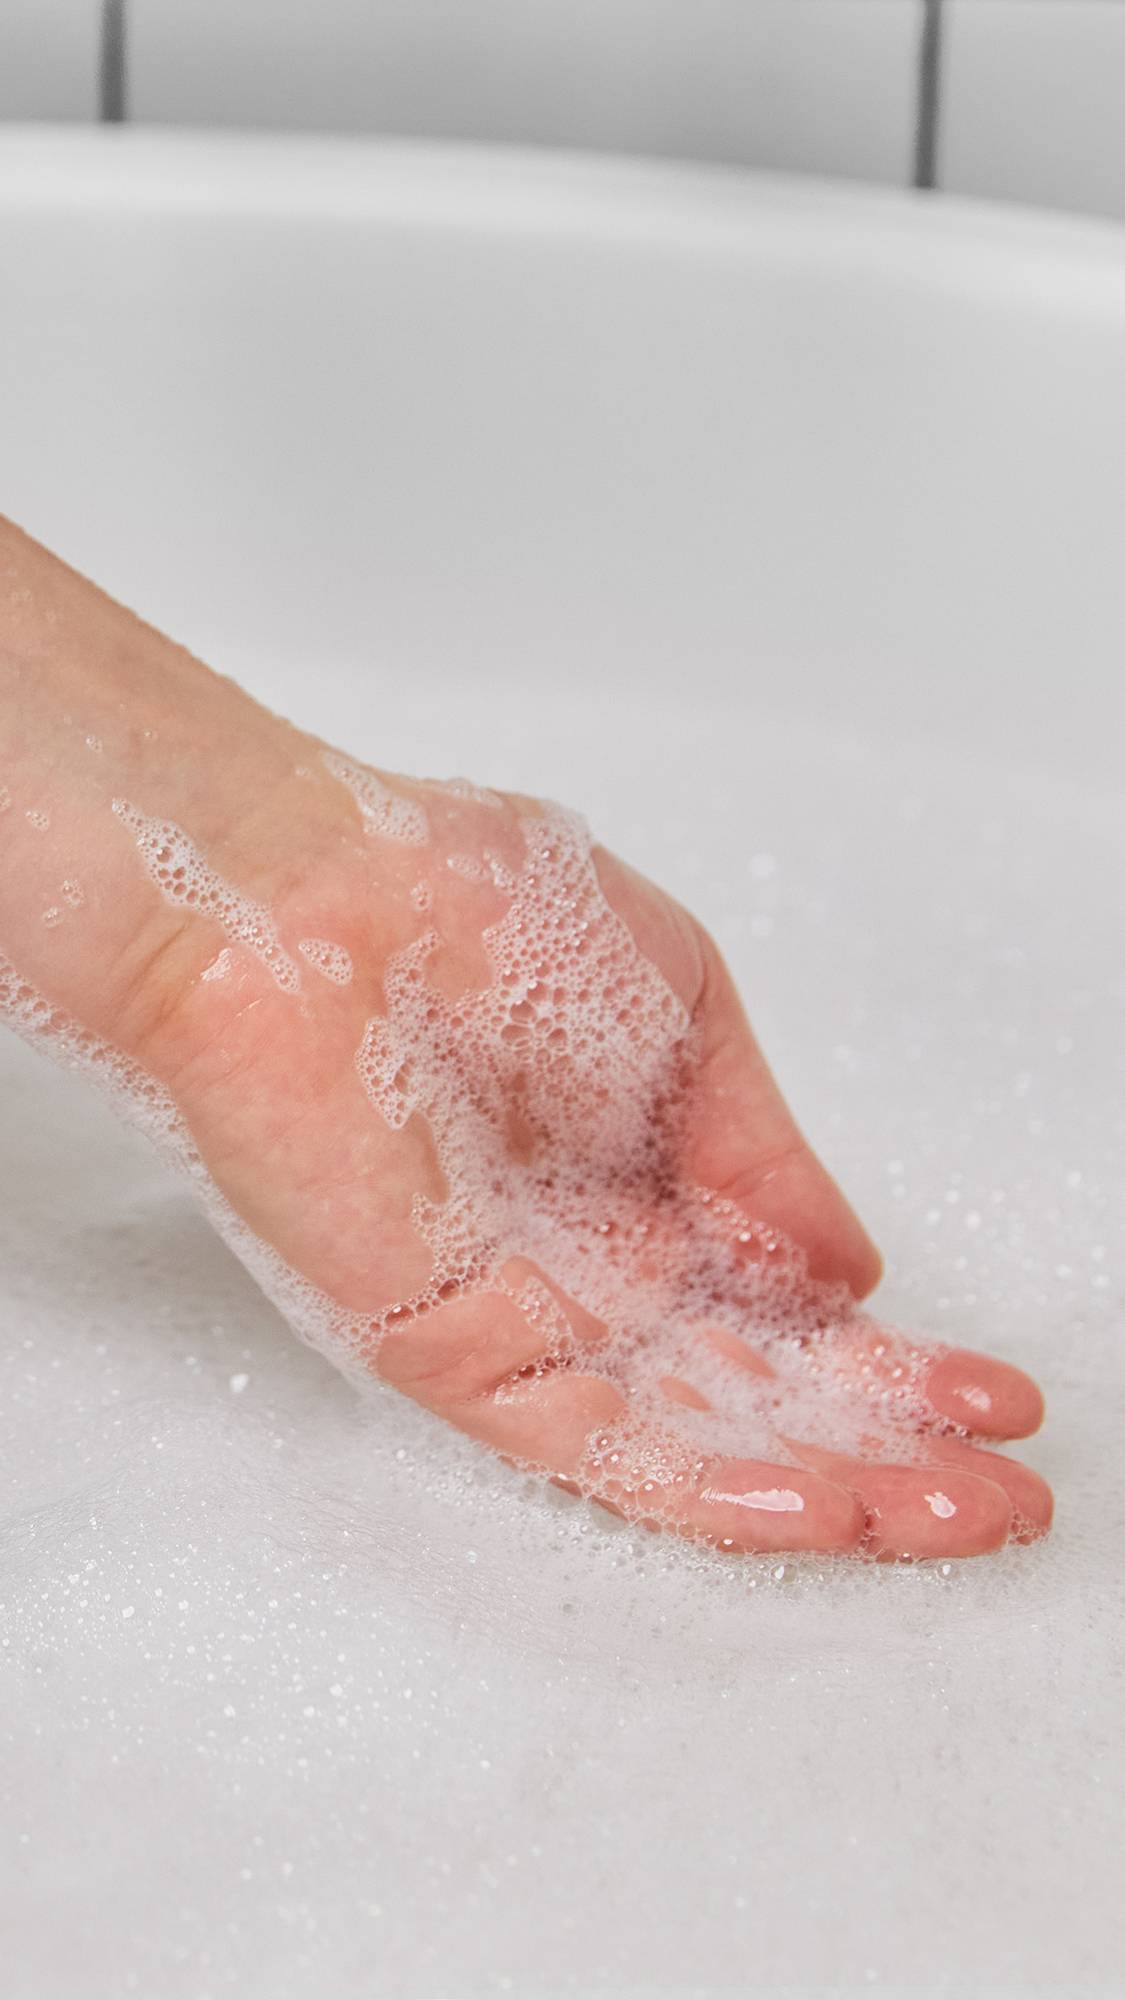 The image shows the model's hand after just having scooped up some thick, white bubbles from the bath water below. 